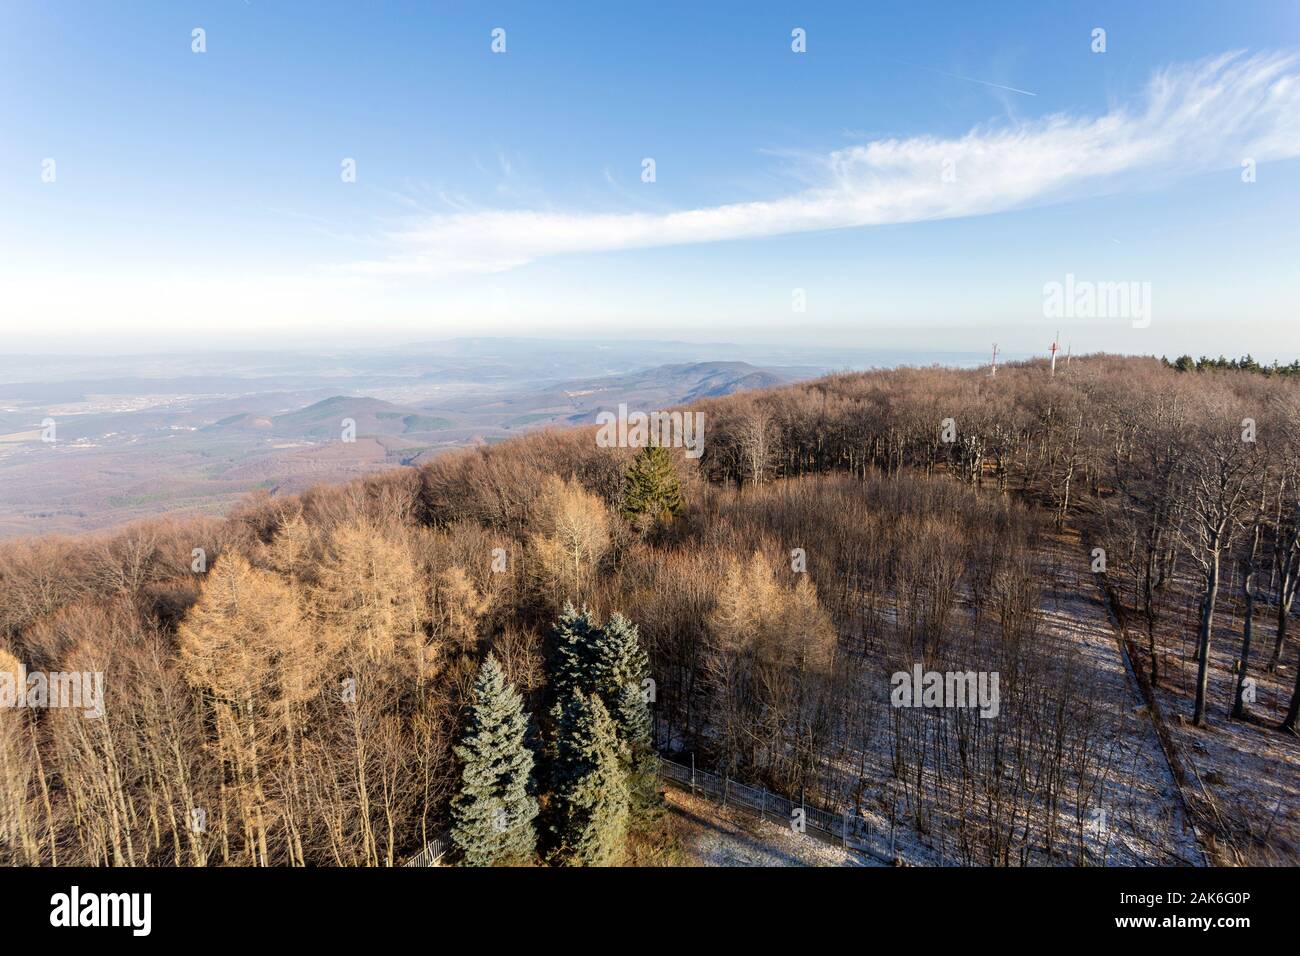 matra-mountains-view-from-the-kekes-on-a-winter-day-in-hungary-2AK6G0P.jpg